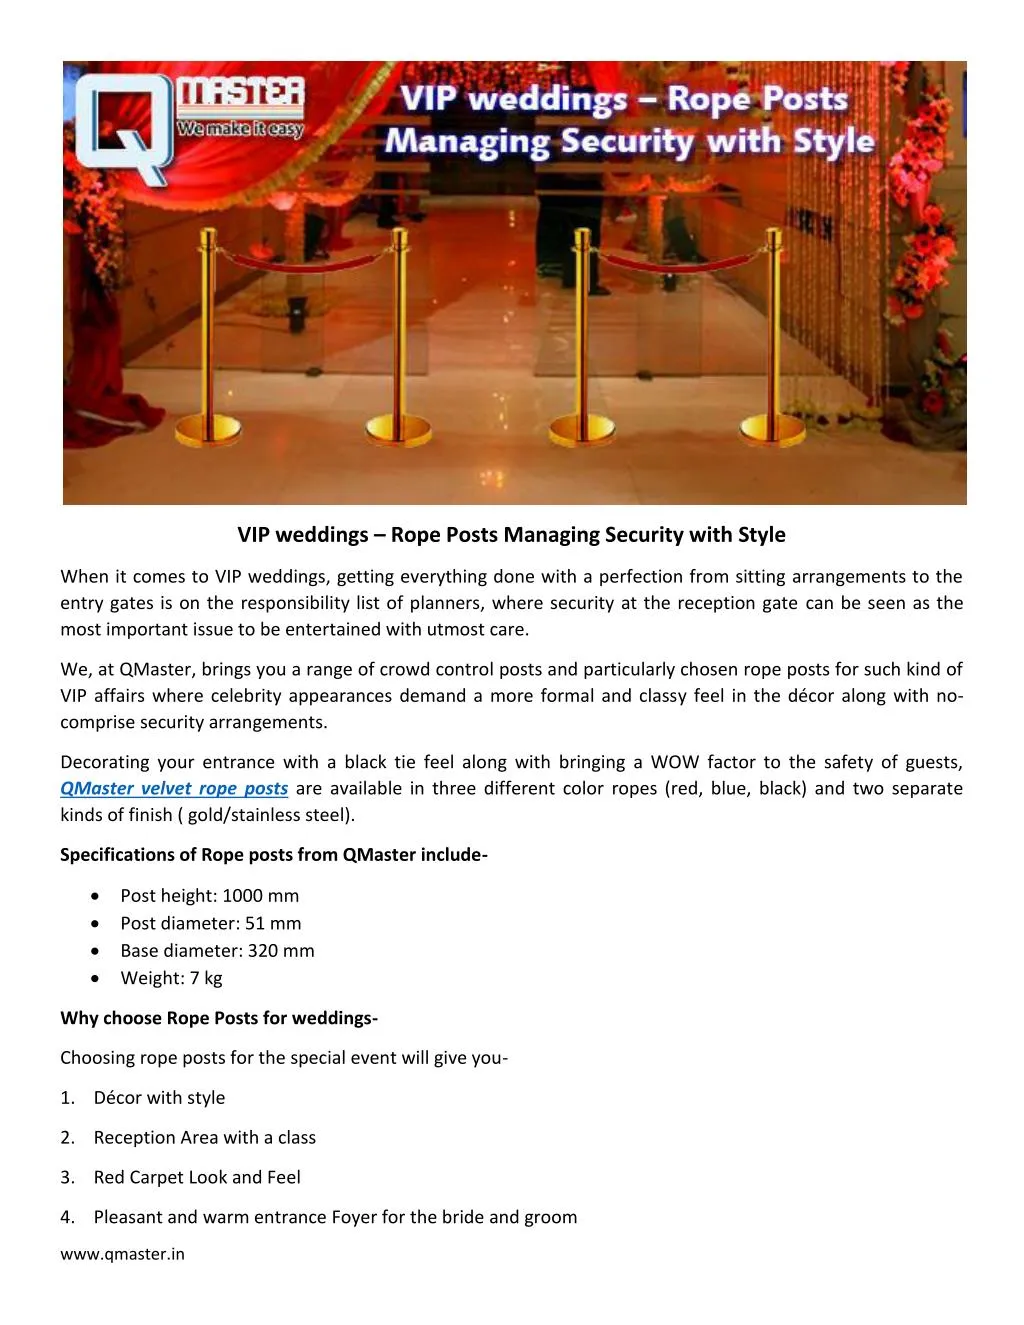 vip weddings rope posts managing security with